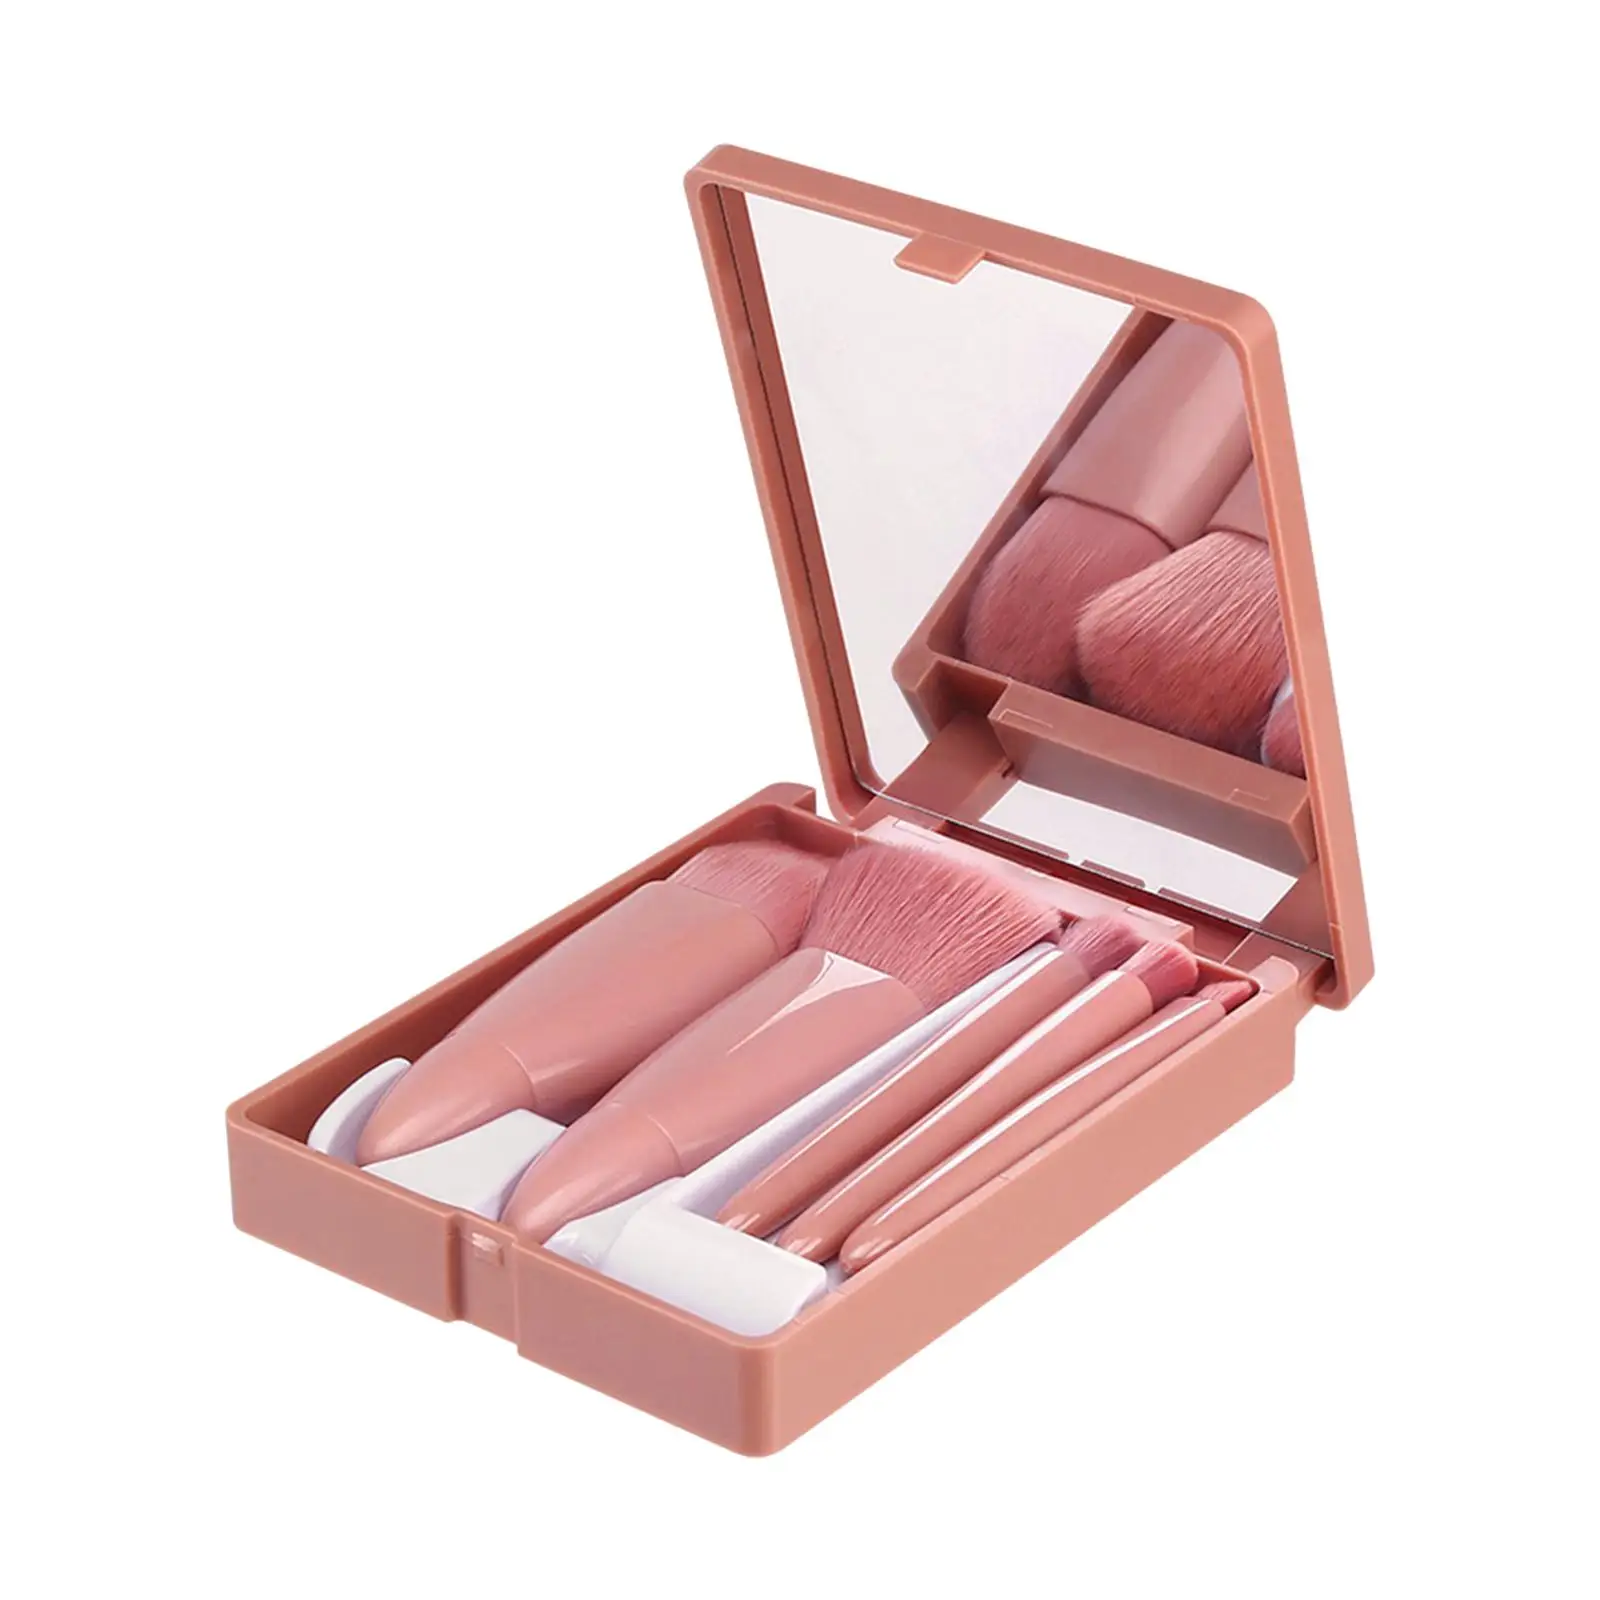 Makeup Brushes Set Cosmetic with Case Foundation Concealer Lip for Women